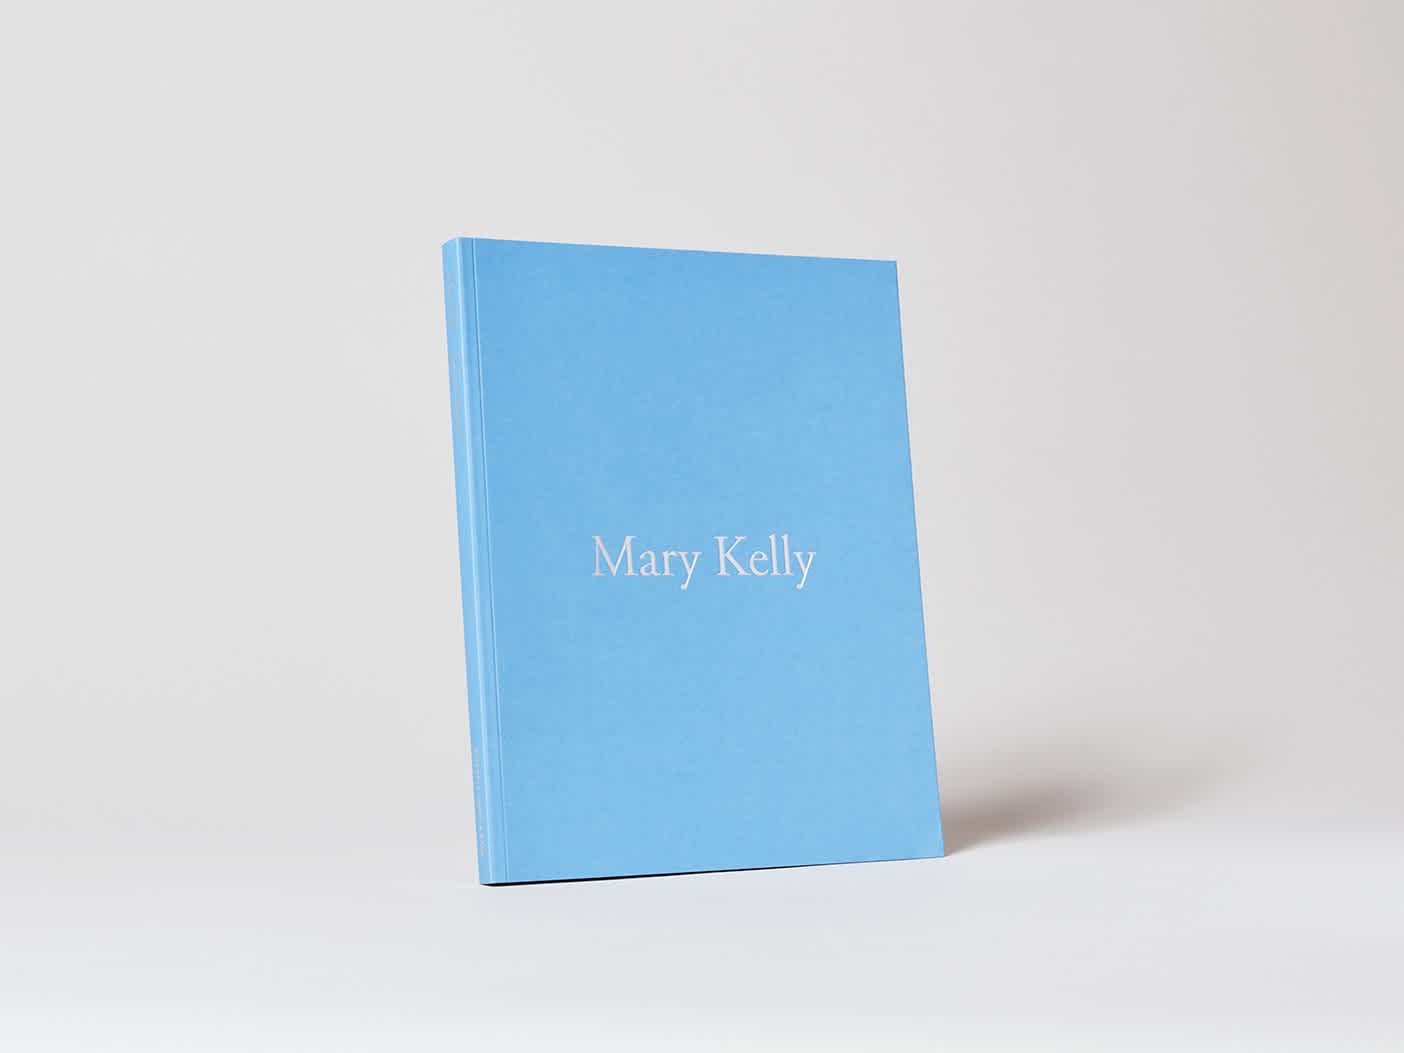 A light blue book stands upright on a light gray background. The title is in the center of the cover in light gray letters.